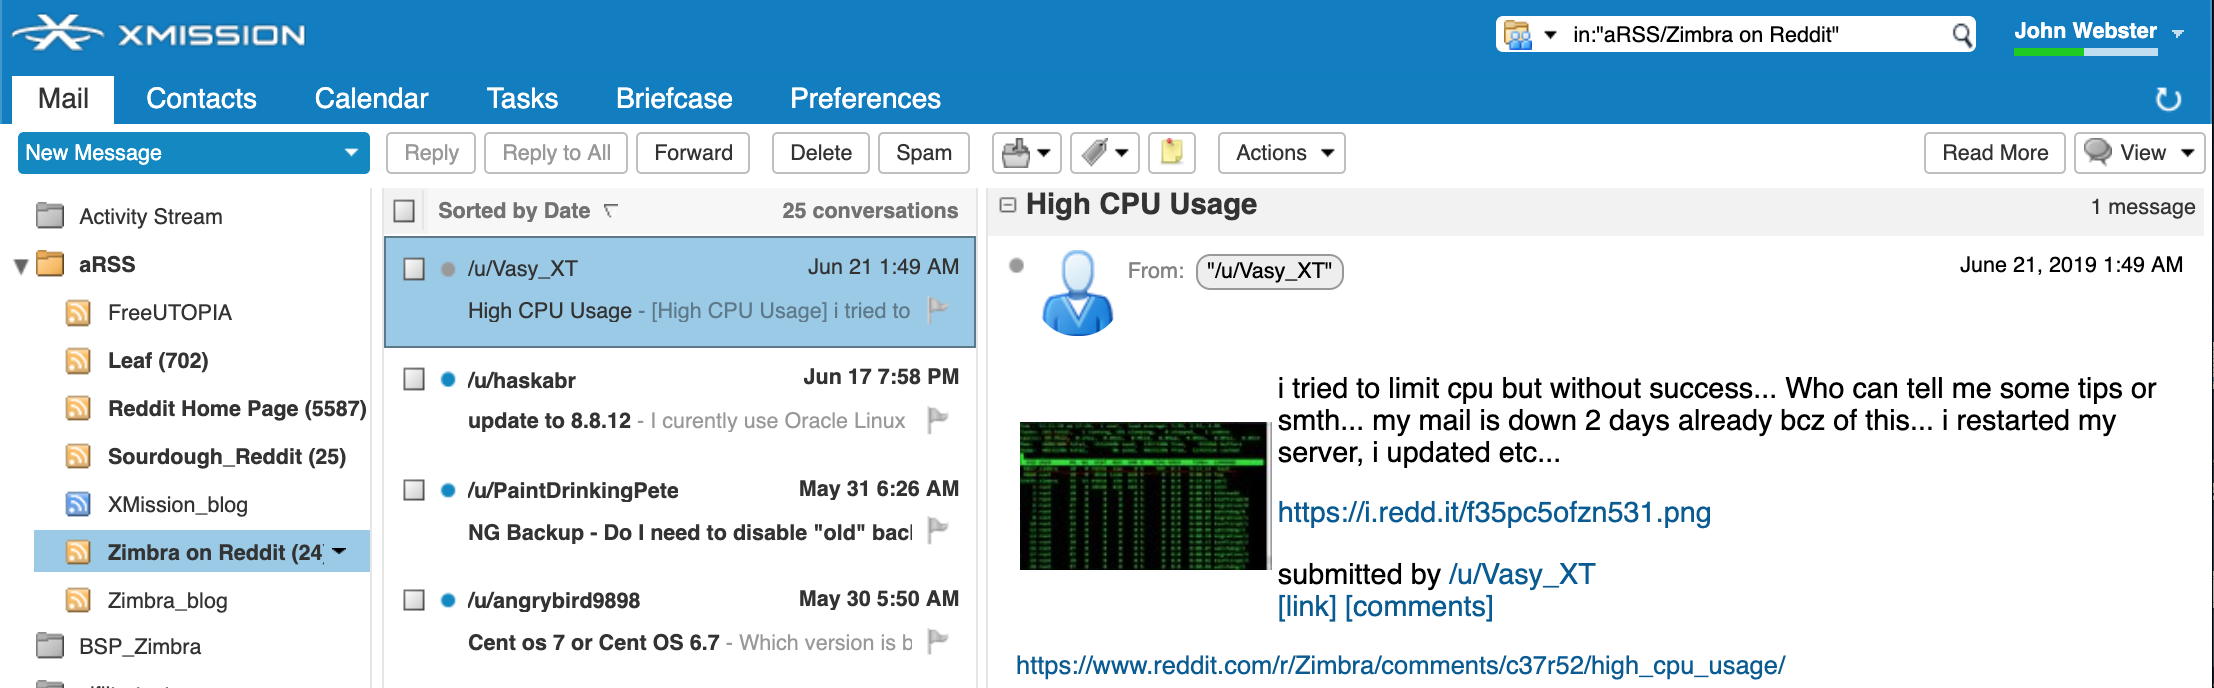 How reddit RSS feeds appear in Zimbra web client.